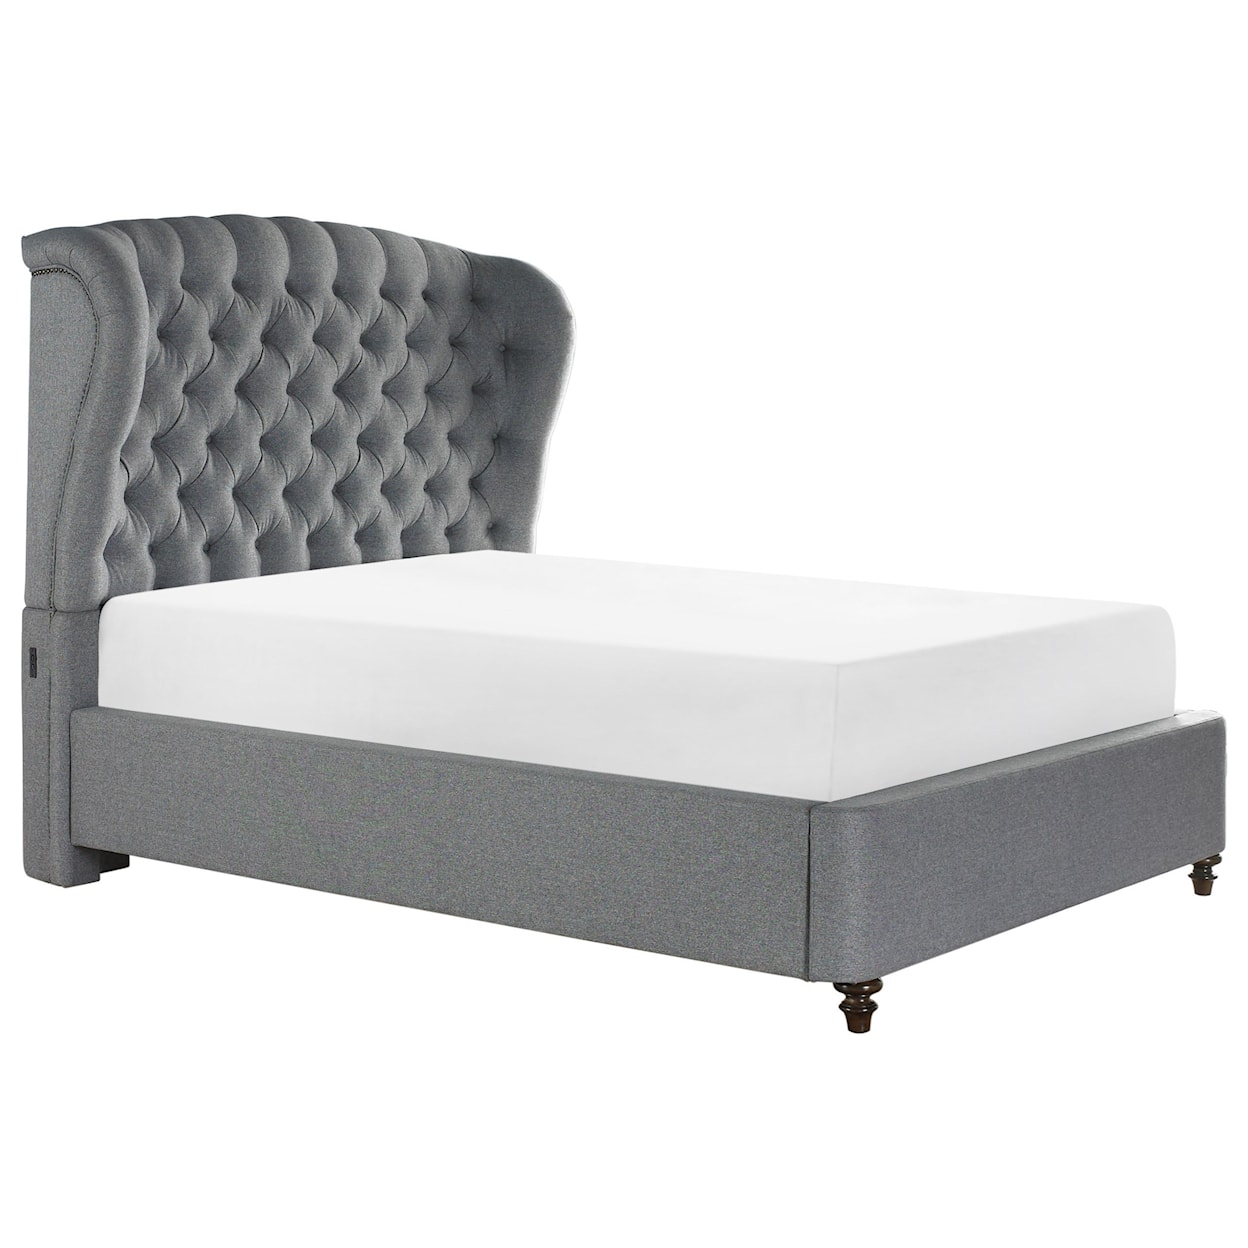 Hillsdale Apollo - 2667 Upholstered Queen Bed